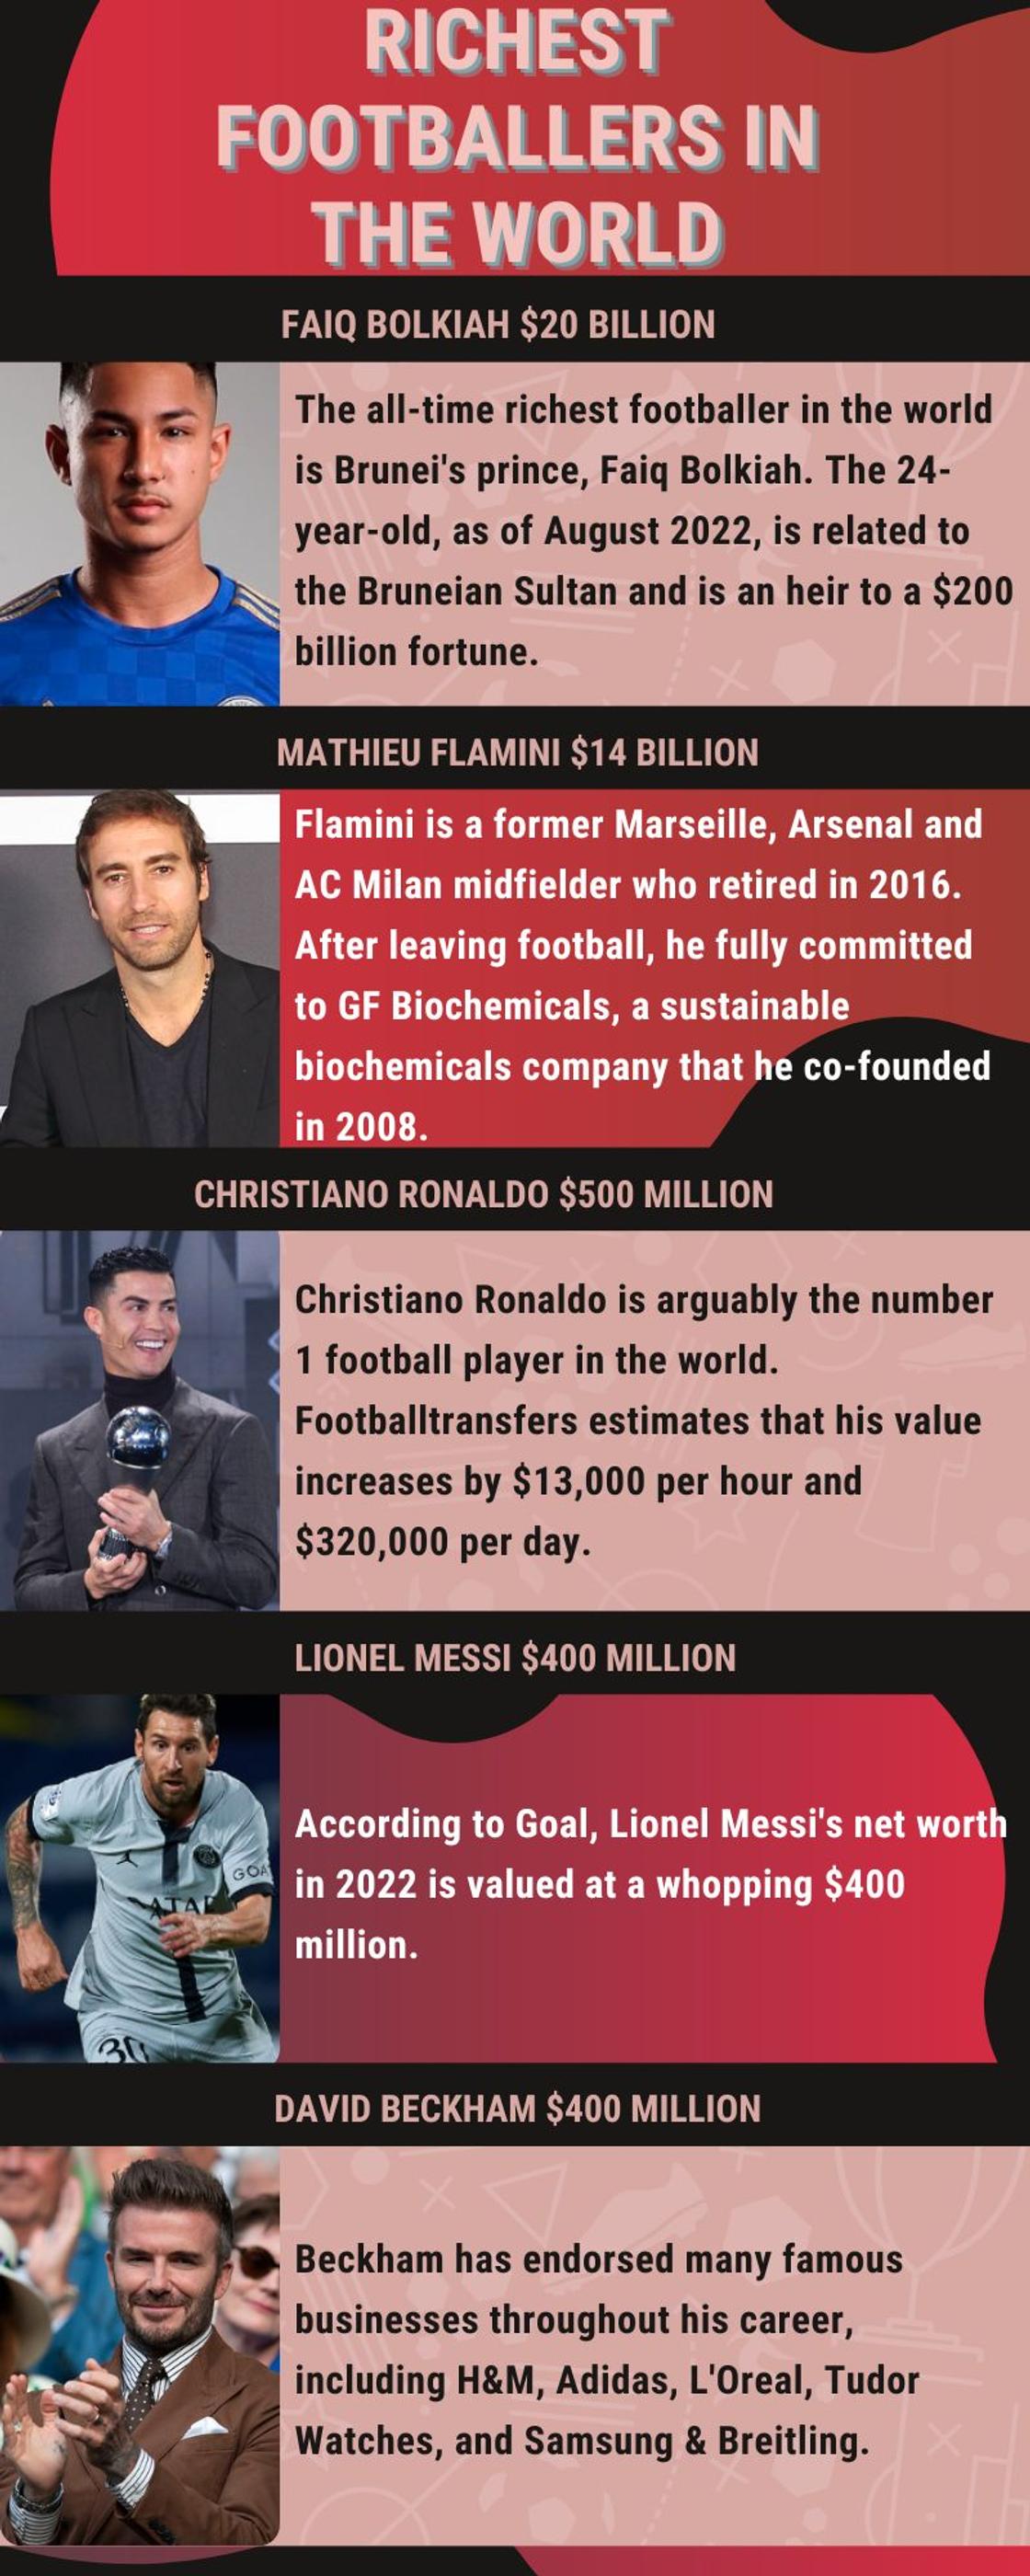 Who is No 1 richest player in the world?